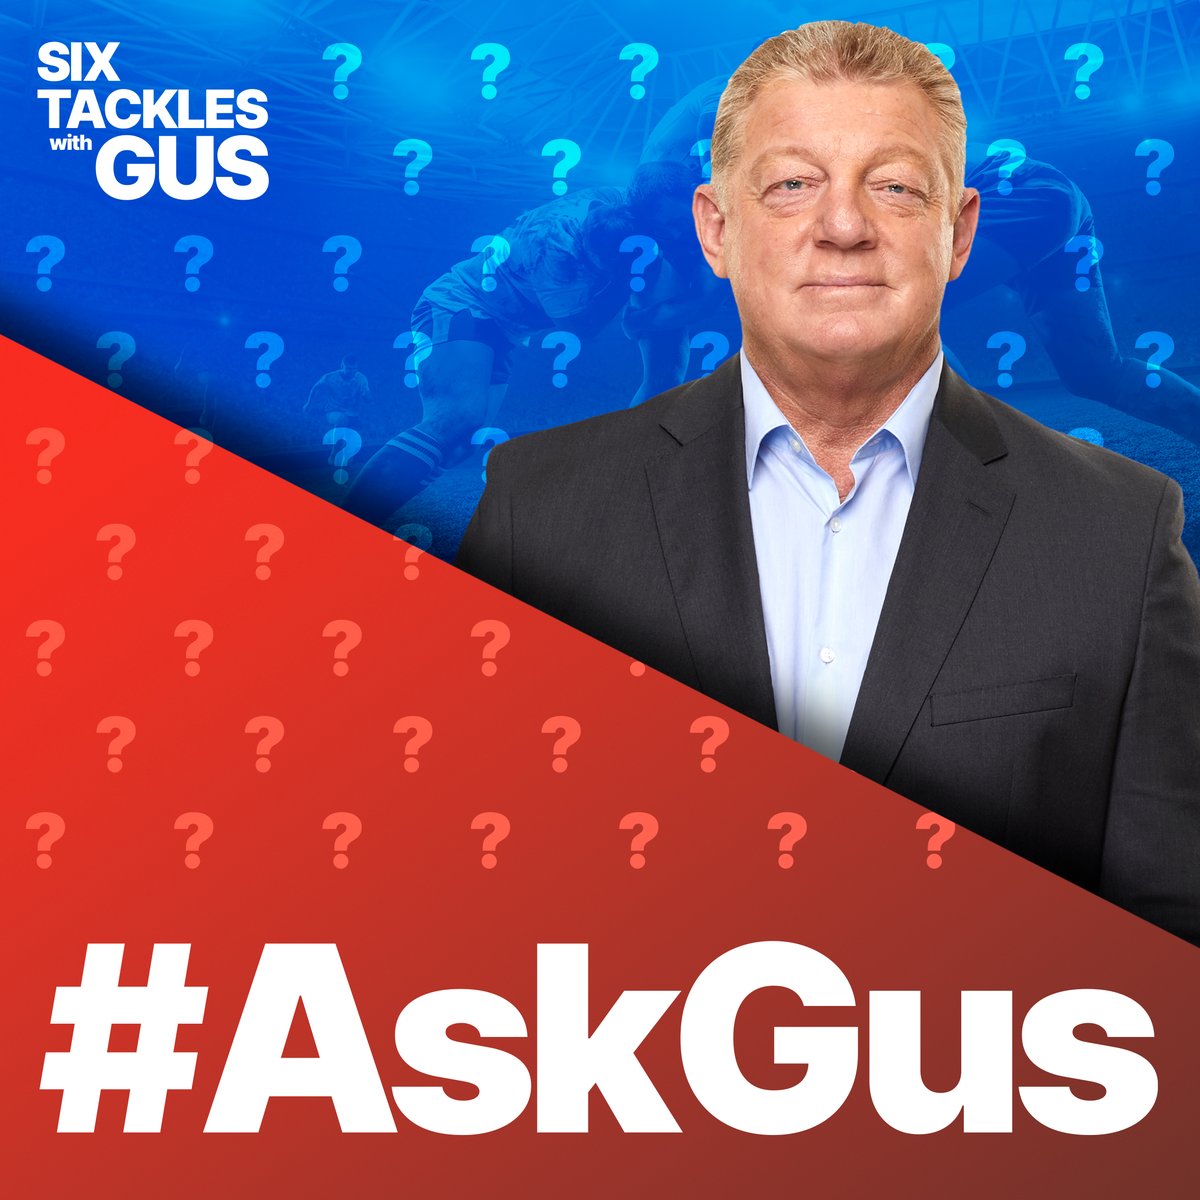 Got a question for @PhilGould15? 🤔

Drop them below with #AskGus and listen to the 'Six Tackles with Gus' podcast each Wednesday to have YOUR question answered. 👇

#9WWOS #NRL